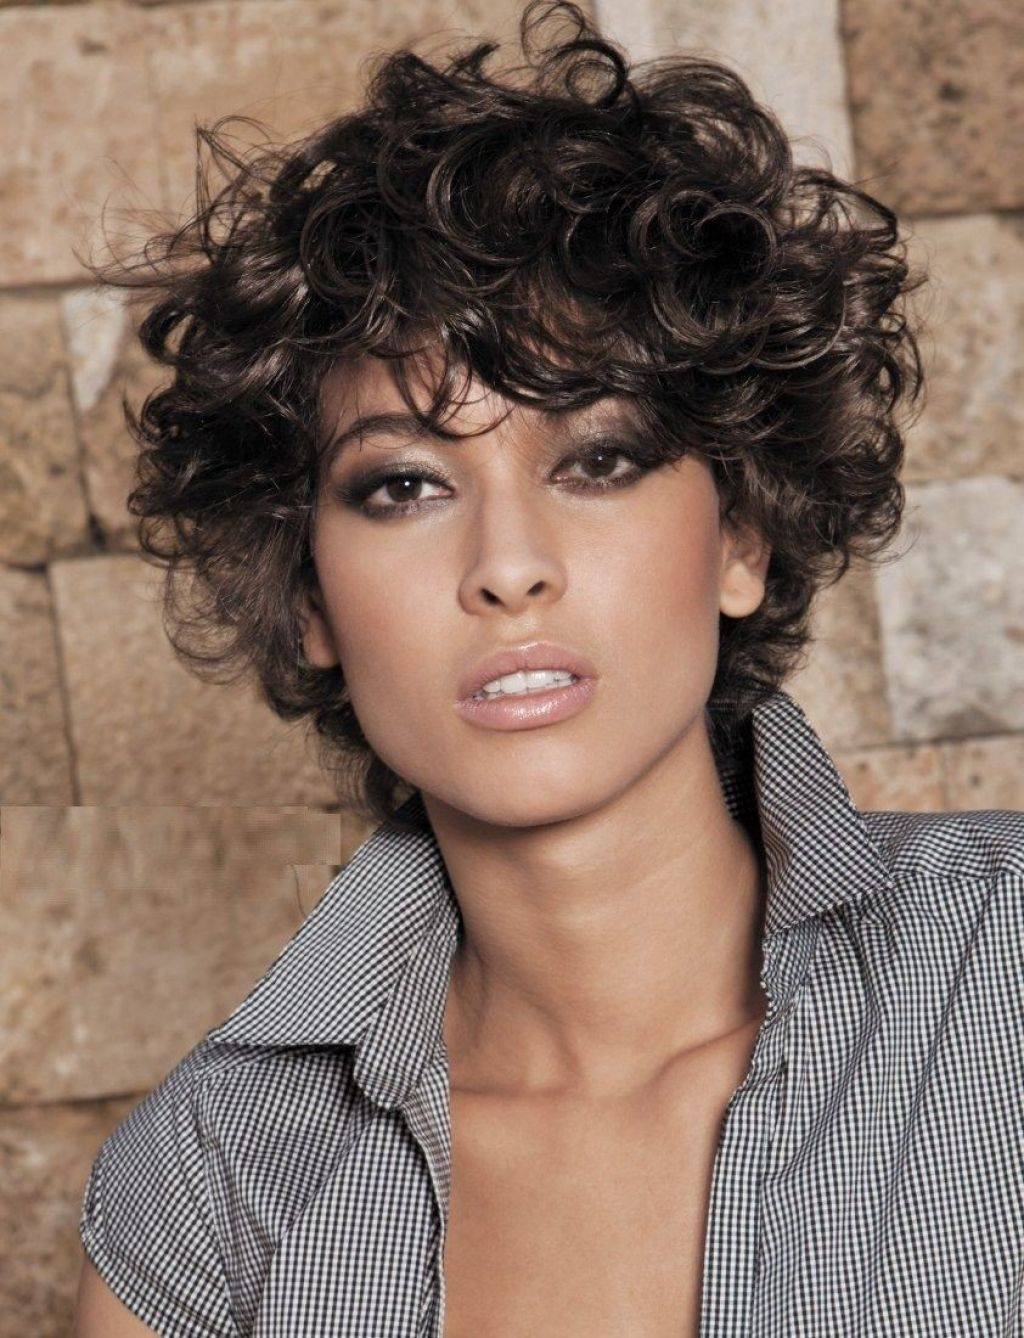 10 Trendy Ideas For Short Curly Hair e2889a 24 inspirational short hairstyle for curly hair redwiki 2022